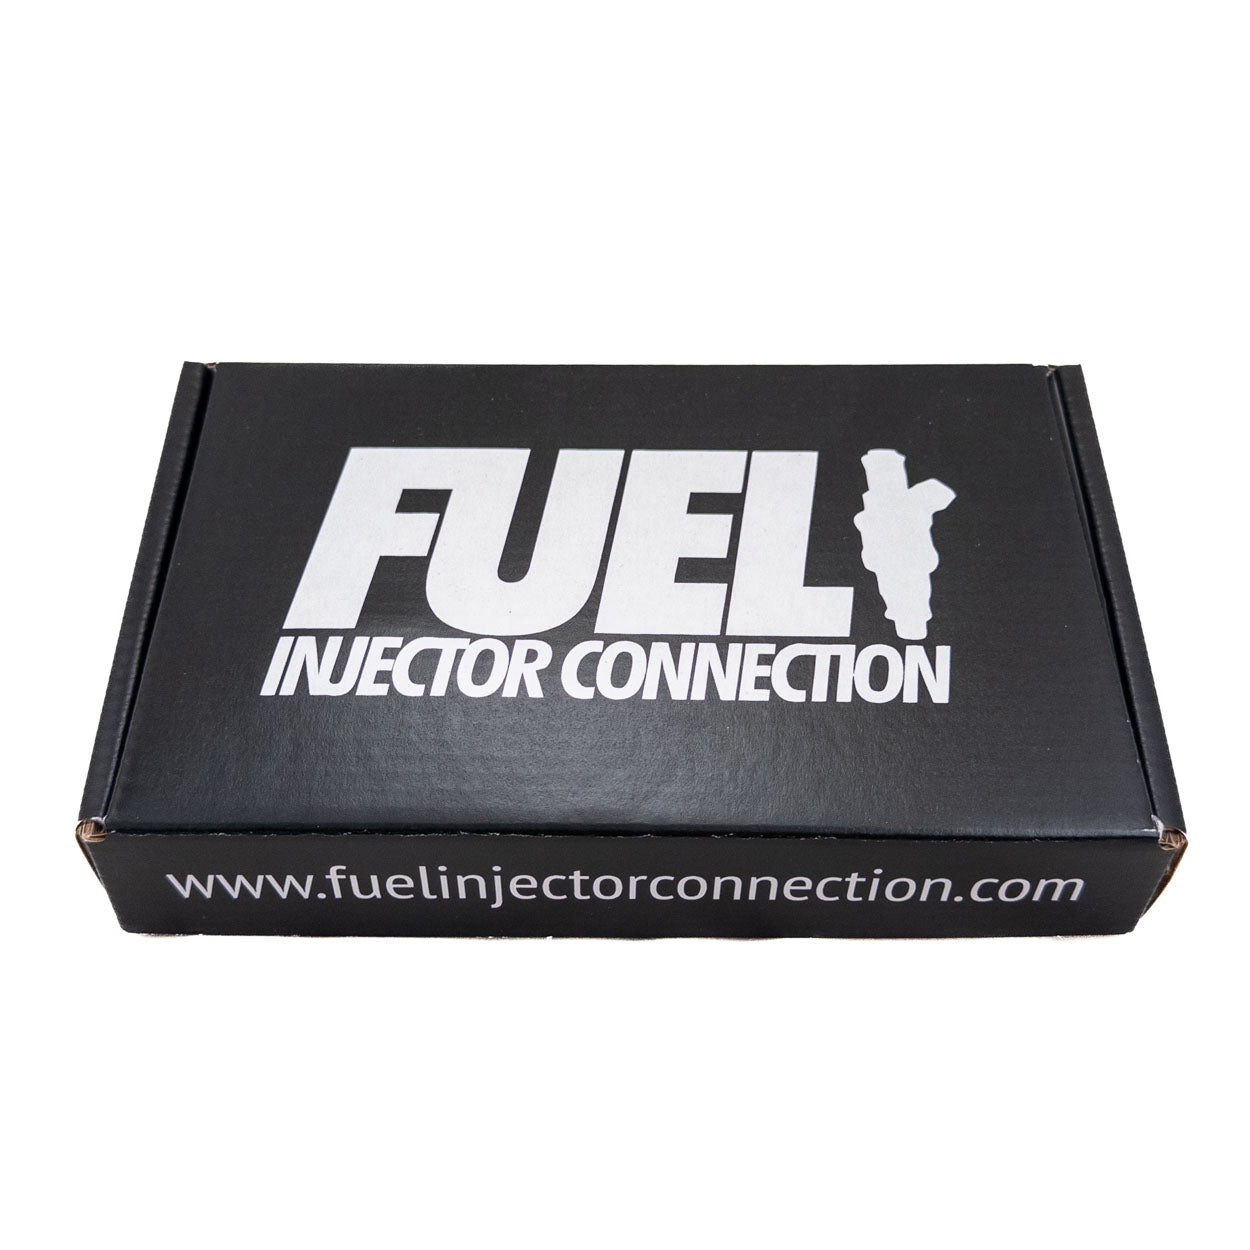 Fuel Injector Connection 1050cc (100lb) Extended Tip 38mm EV6 Injector (set of 8)